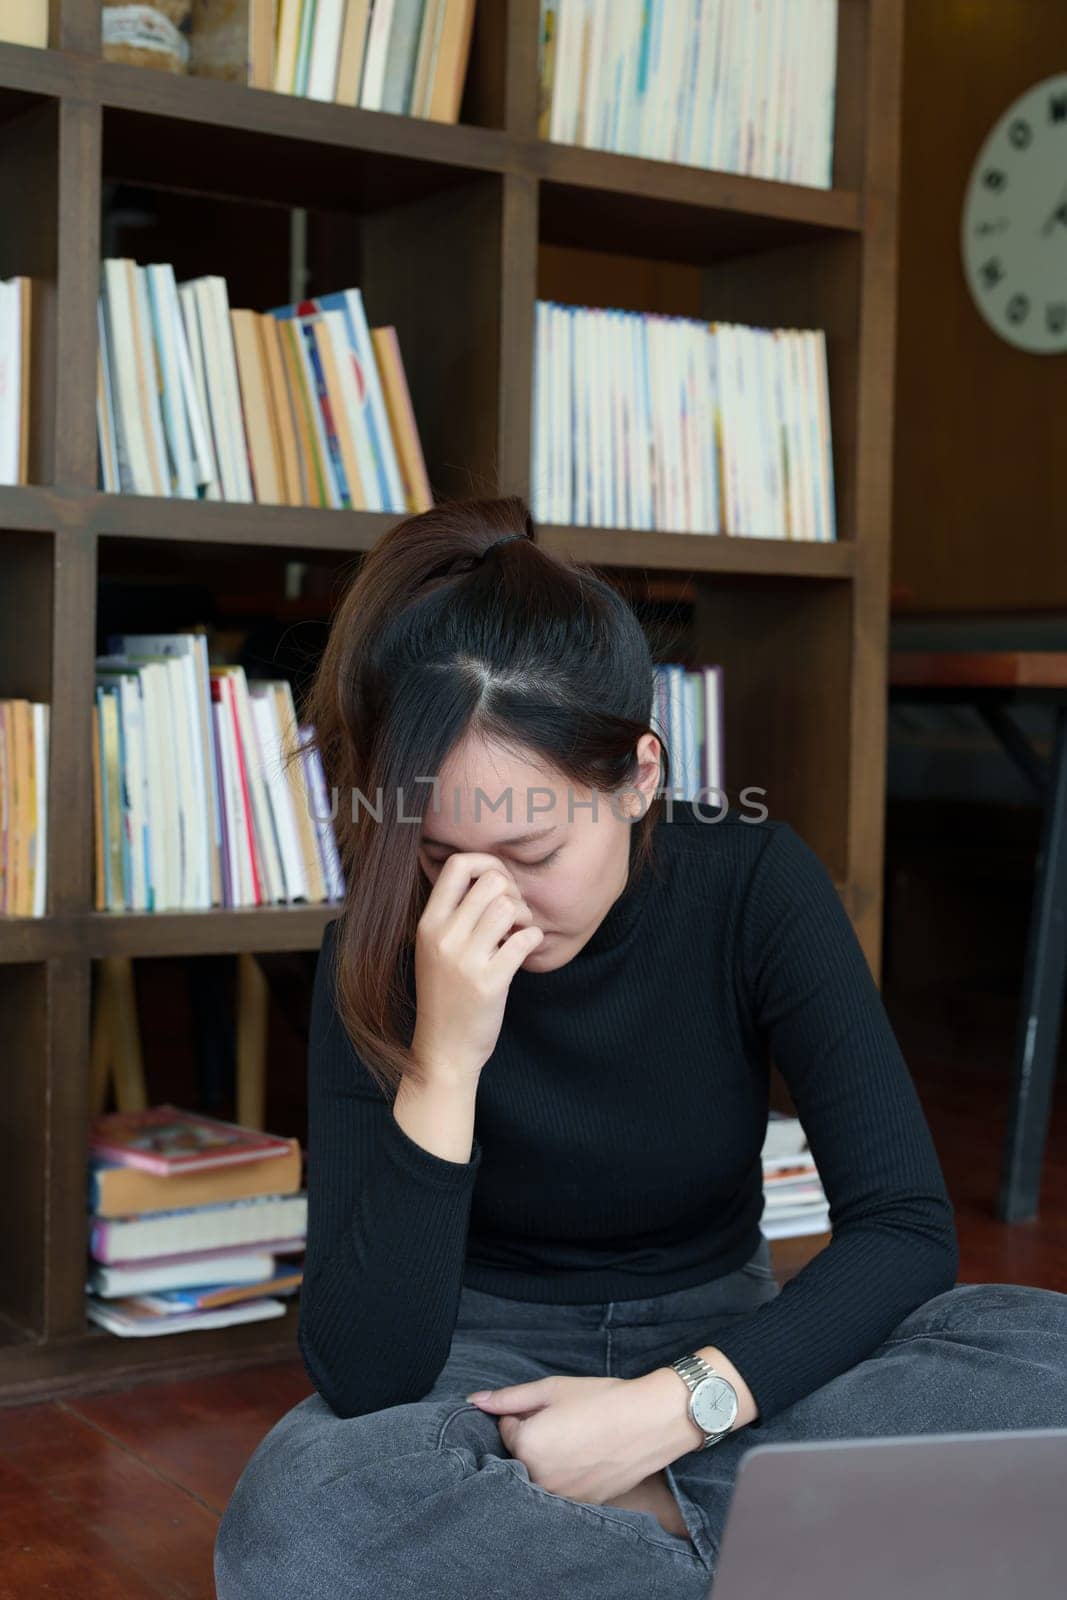 A portrait of a young Asian woman using a computer, wearing headphones and using a notebook to study online shows boredom and pain from video conferencing on a wooden desk in library.